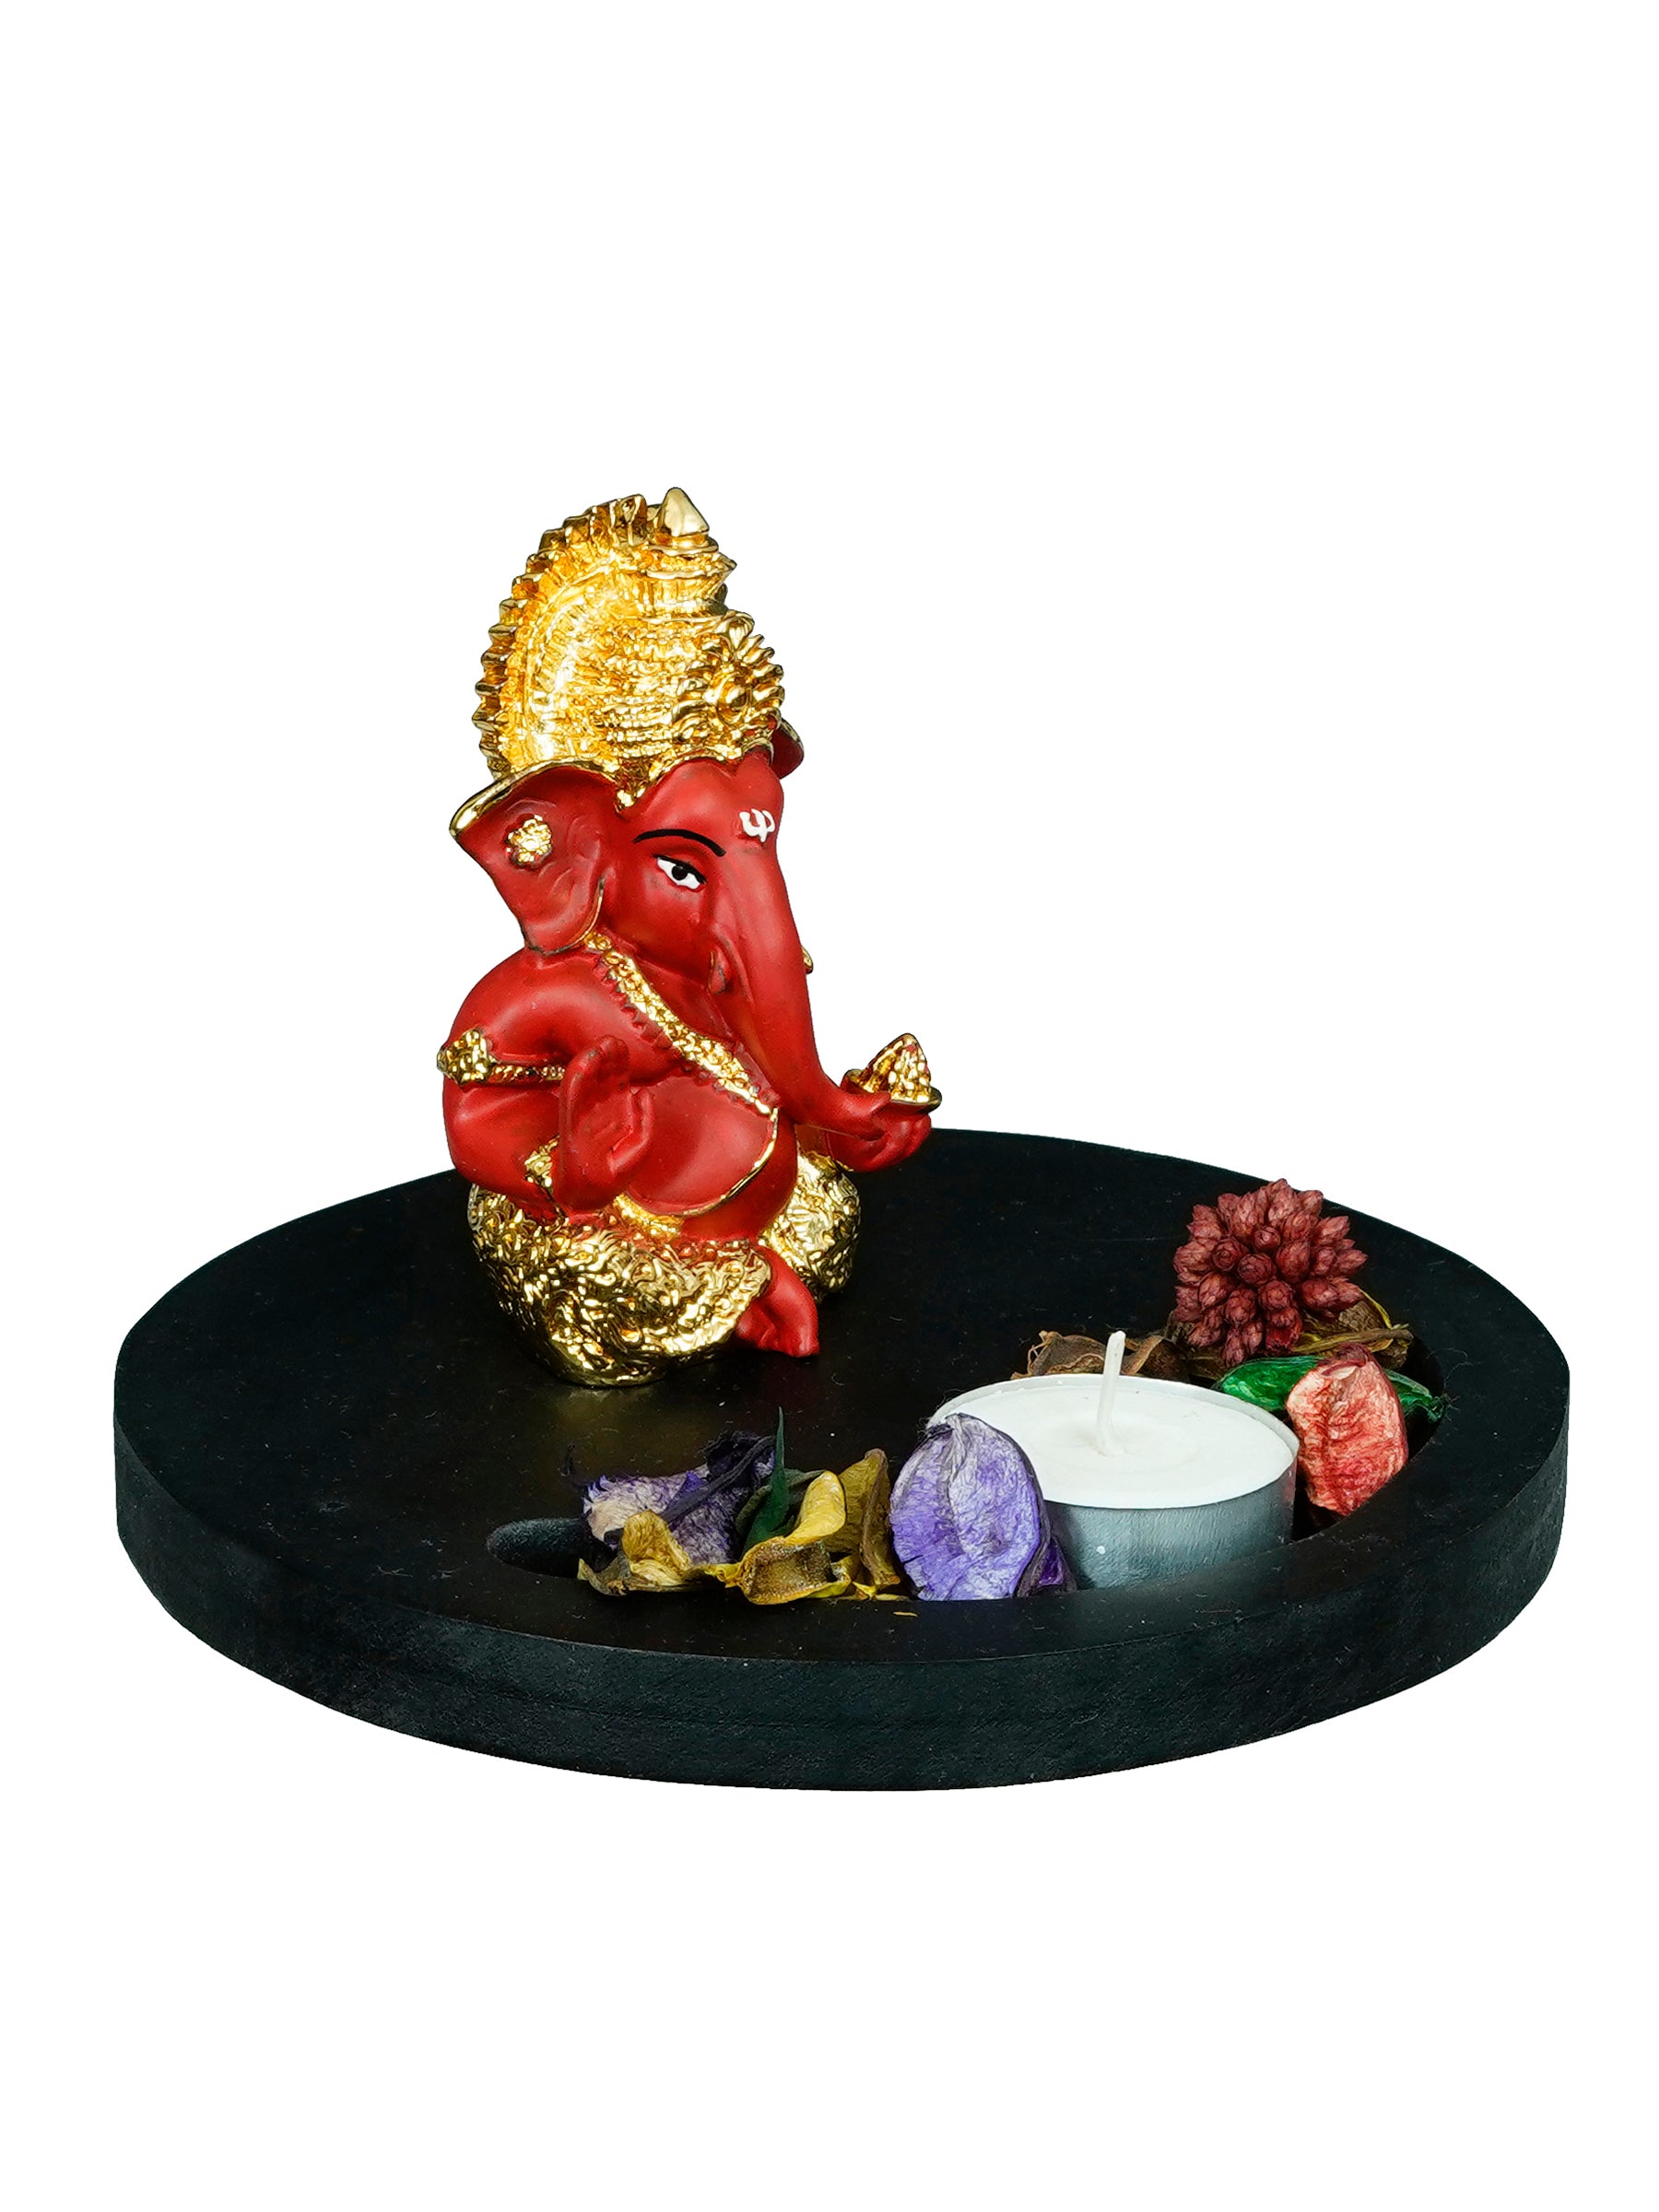 Polyresin Gold Plated Red Ganesha Idol on Wooden Base Tea Light Candle holder 4